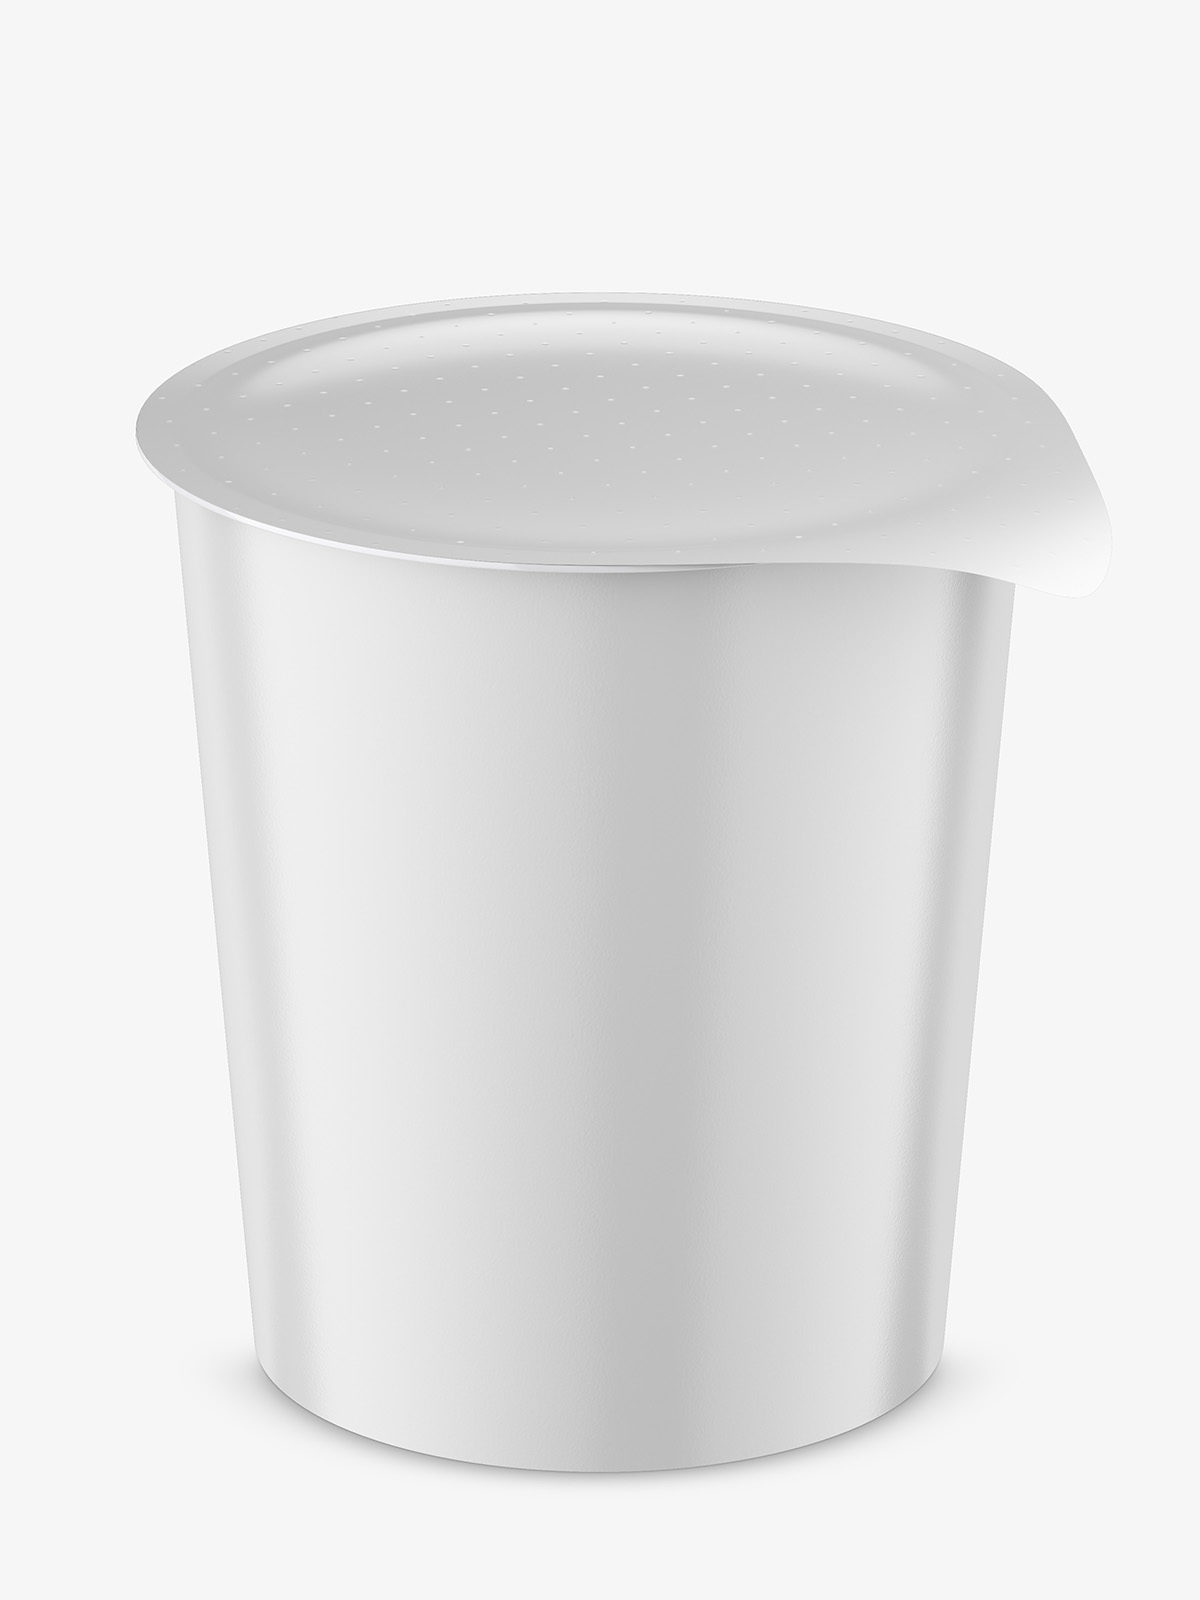 Download Instant Food Cup Mockup Glossy Top View Smarty Mockups